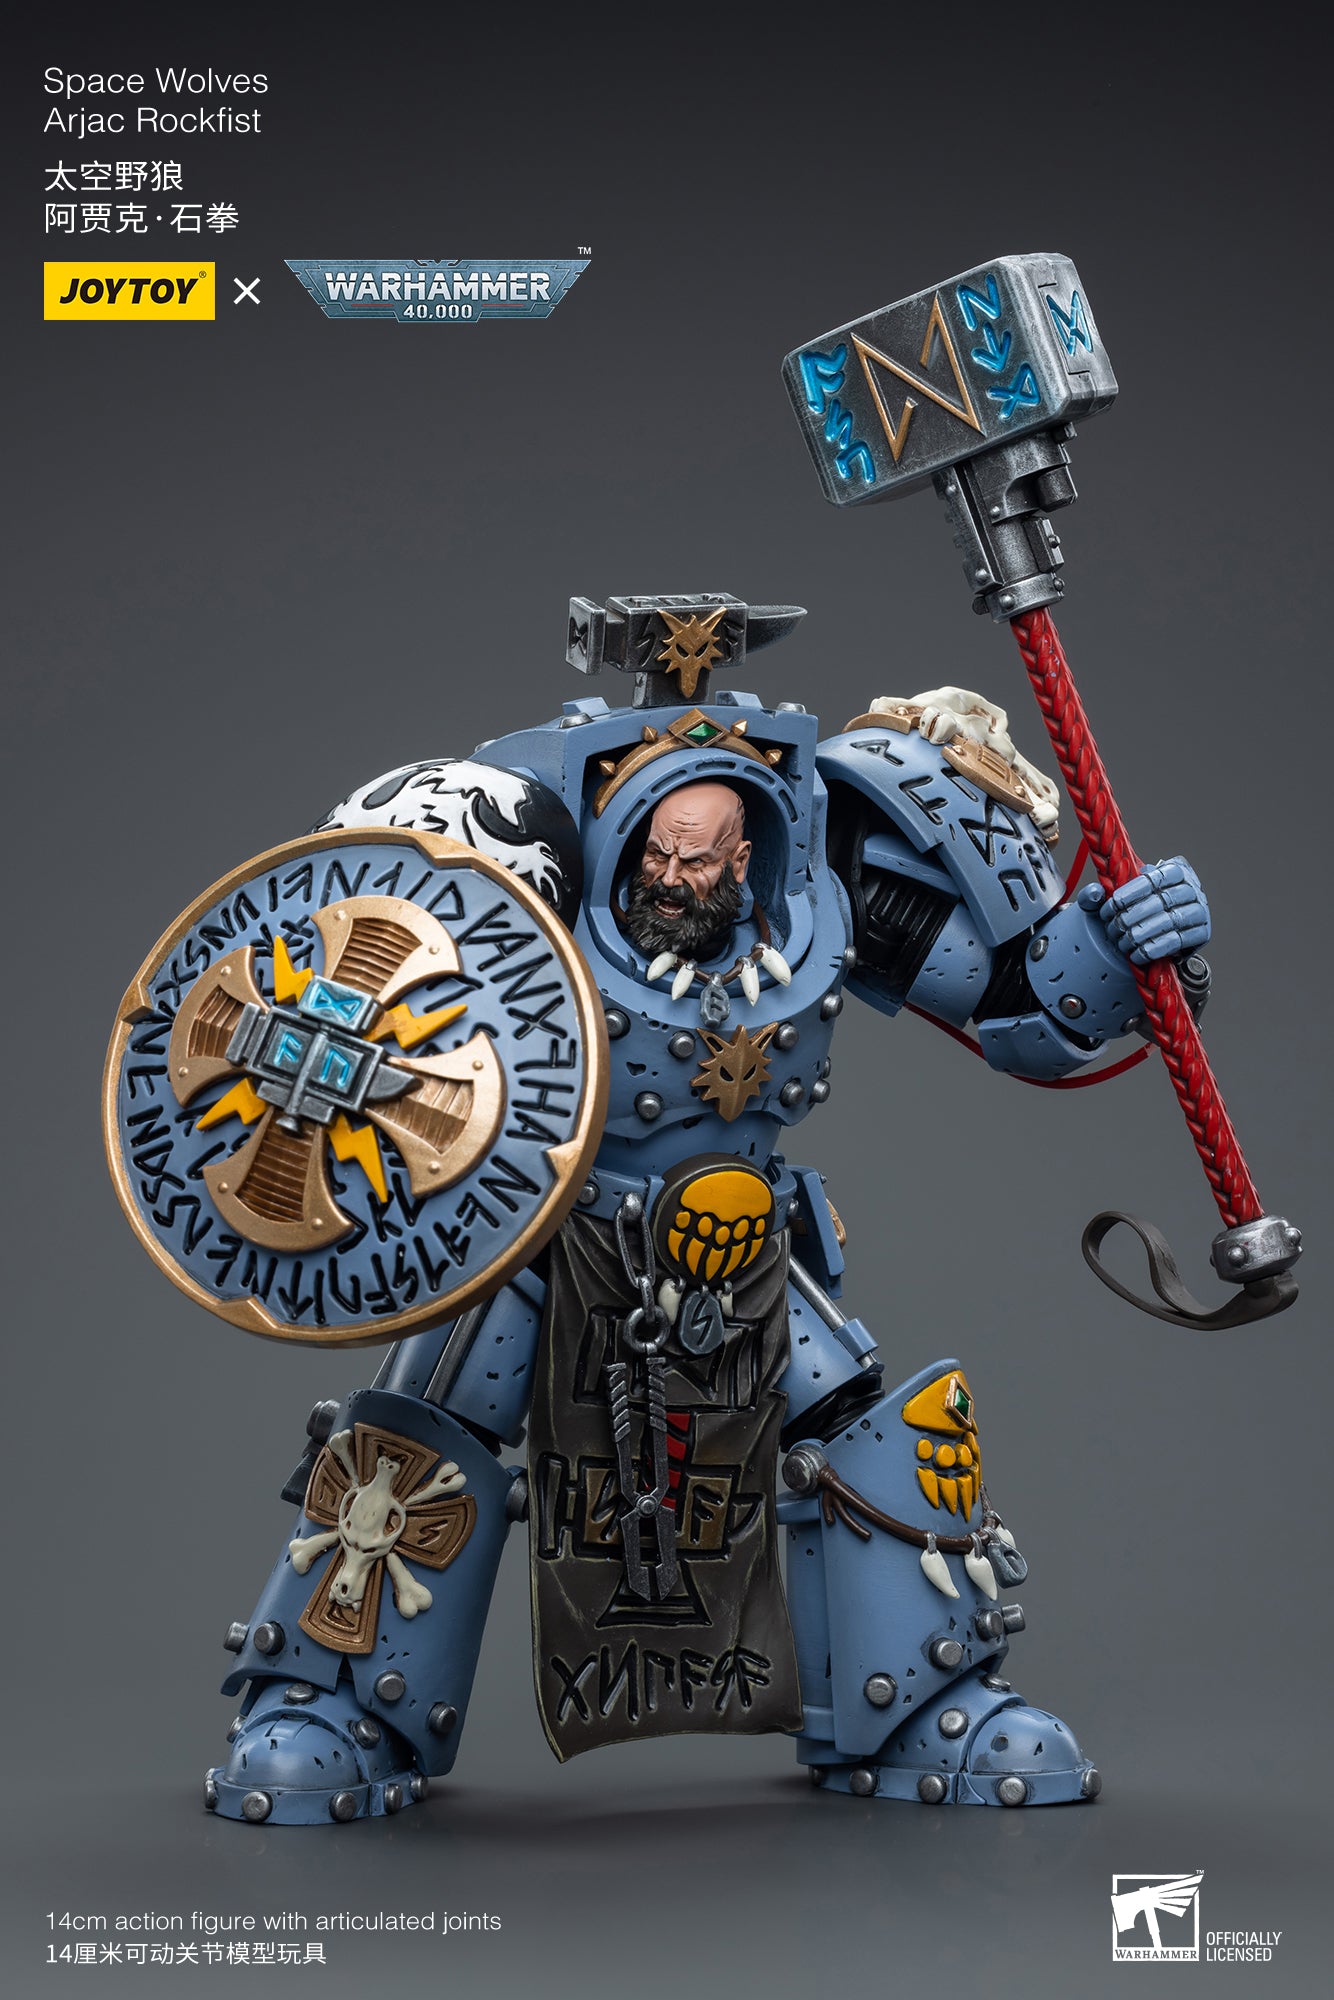 Space Wolves Arjac Rockfist